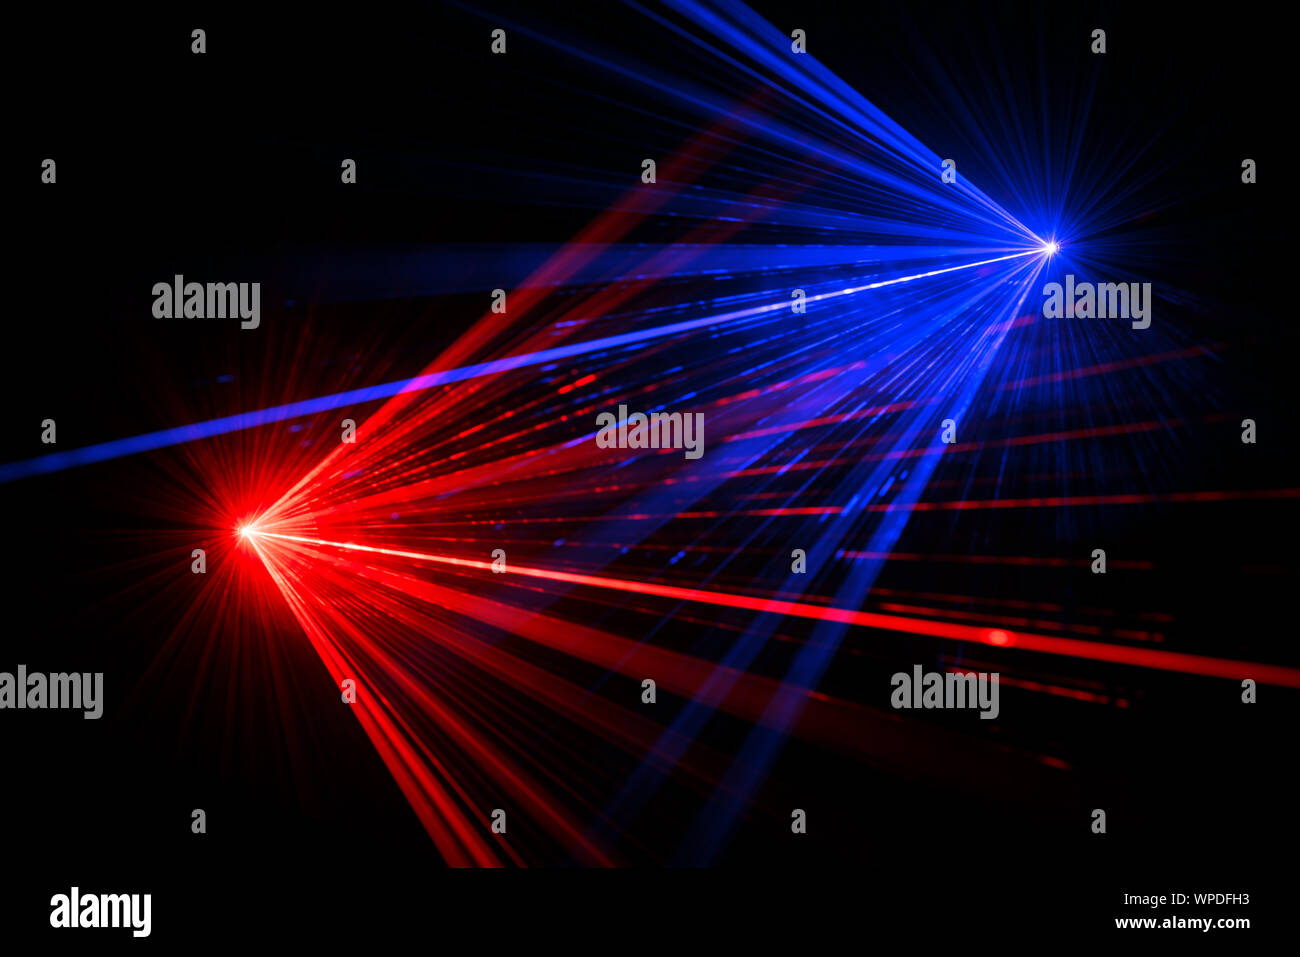 Blue and red laser beam light effects on black background Stock Photo